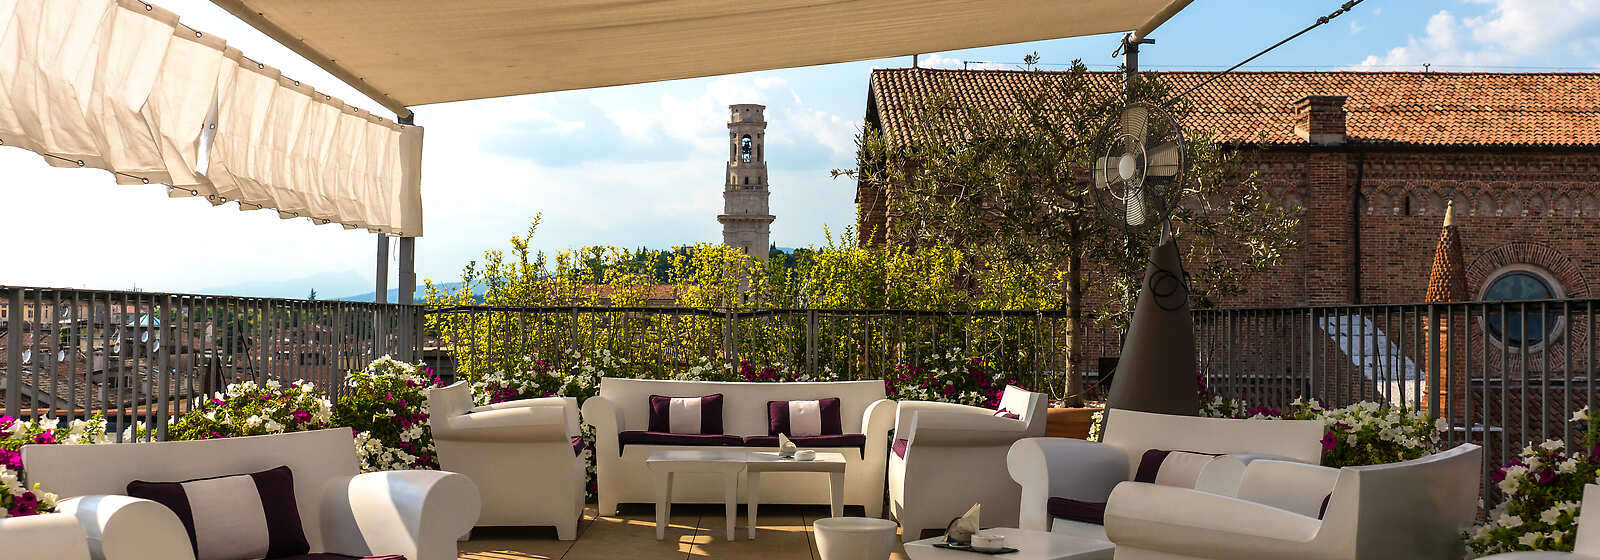 The Due Torri Hotel hosts the only rooftop panoramic terrace of the city, seasonal opening